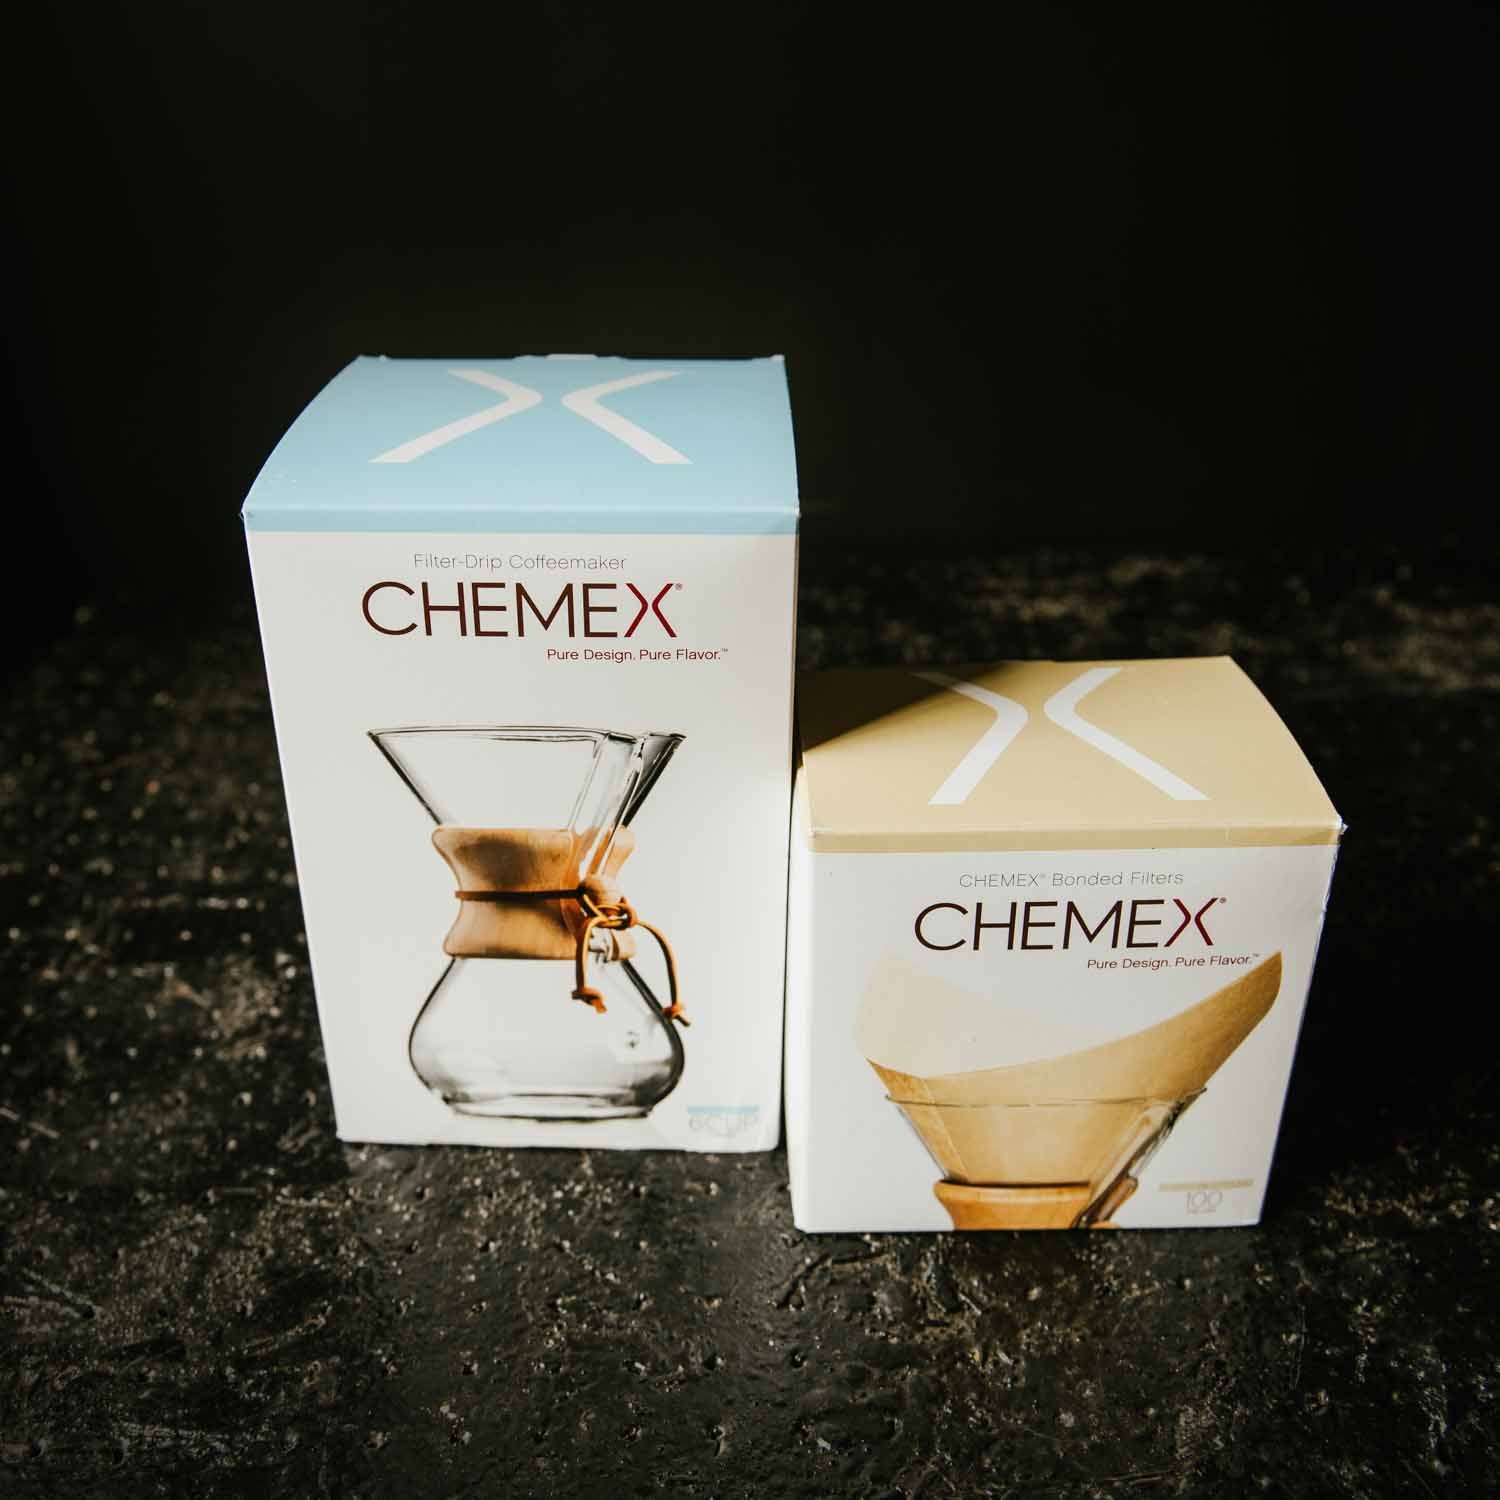 Chemex Pour-Over Glass Coffeemaker - Classic Series - 6-Cup - Exclusive  Packaging